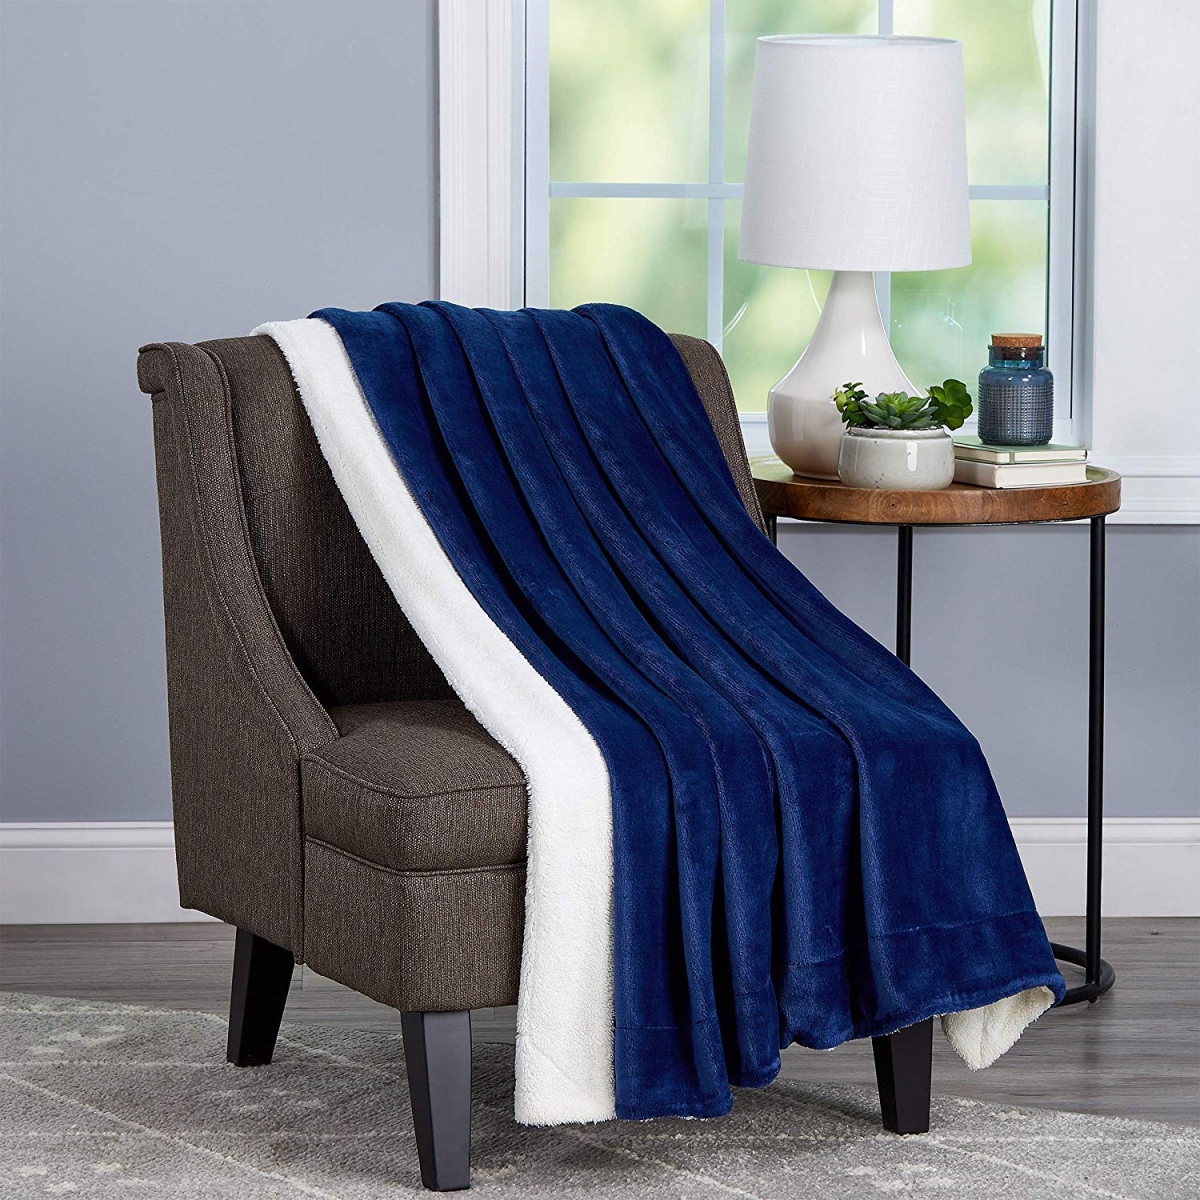 Lavish Home 66-throw011 Poly Oversized Plush Woven Polyester Sherpa Fleece Solid Color Throw - Midnight & White